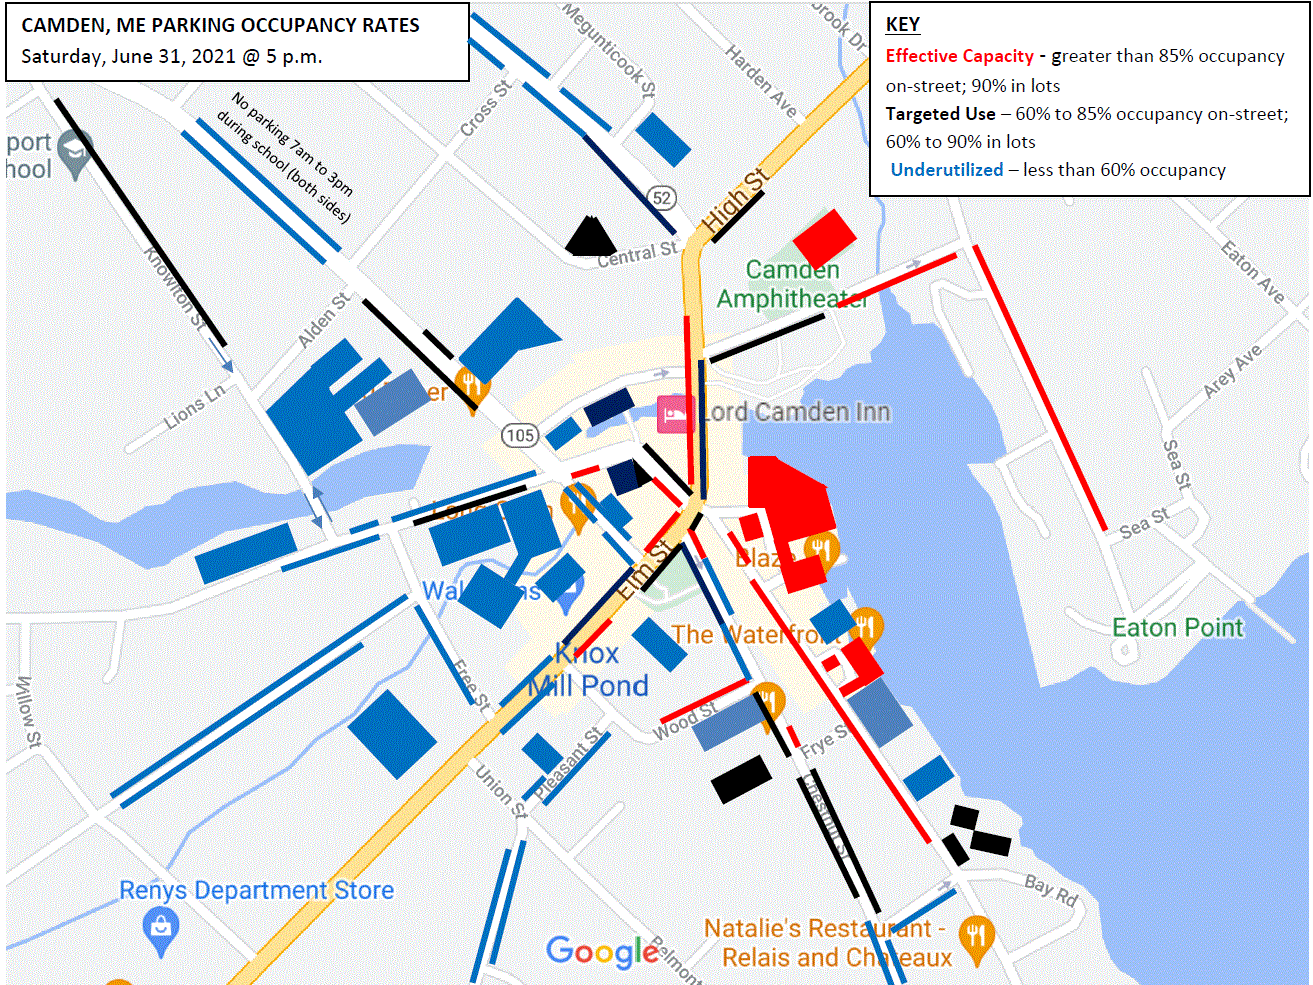 06-31-2021 5pm Parking Occupancy Rates